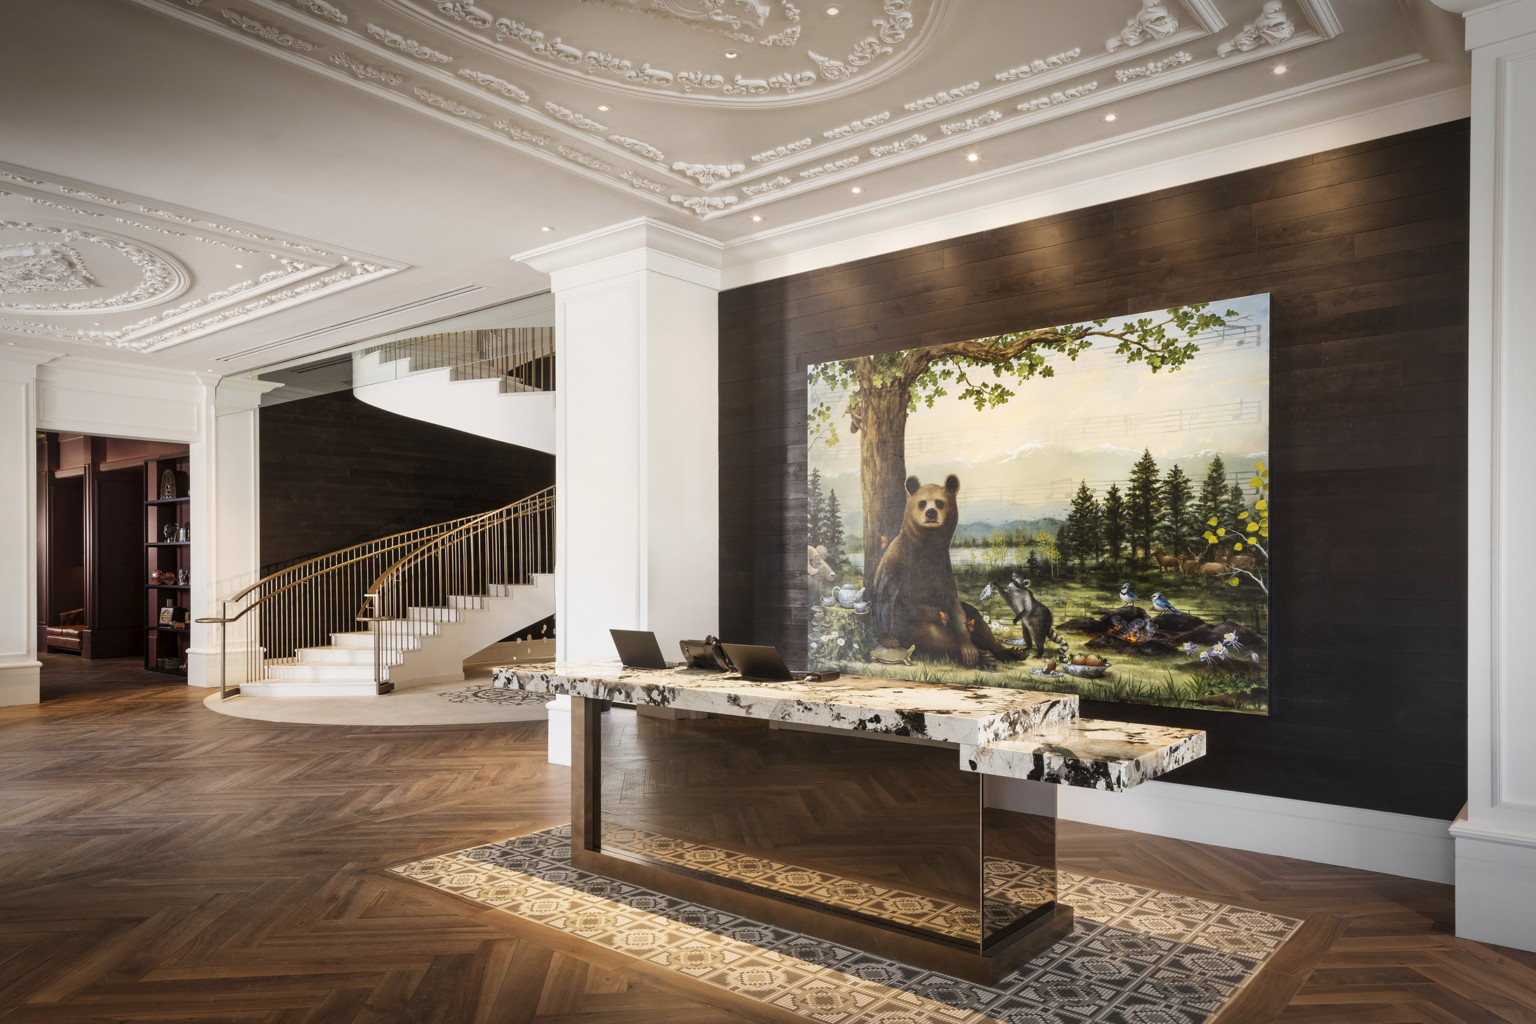 Reception desk with white and black marble counter in white lobby in front of recessed wood wall with painting of a bear